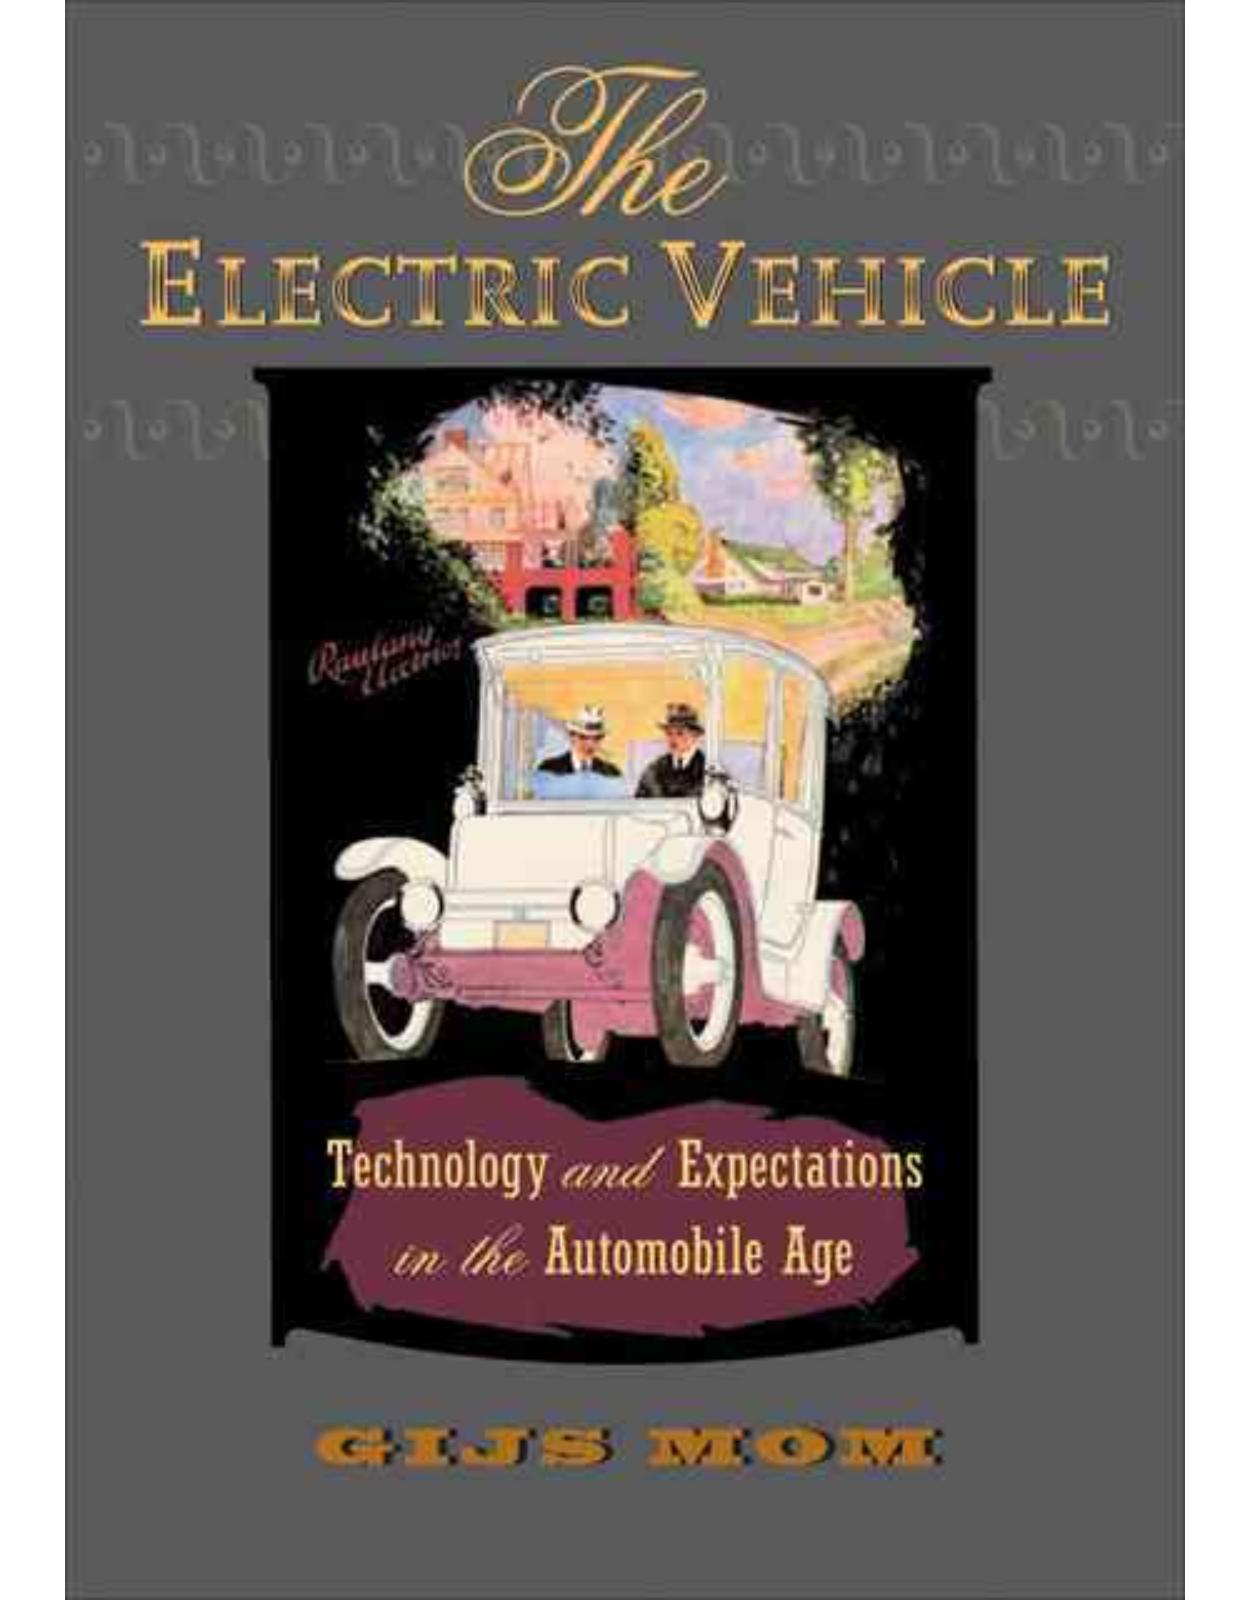 Electric Vehicle. Technology and Expectations in the Automobile Age